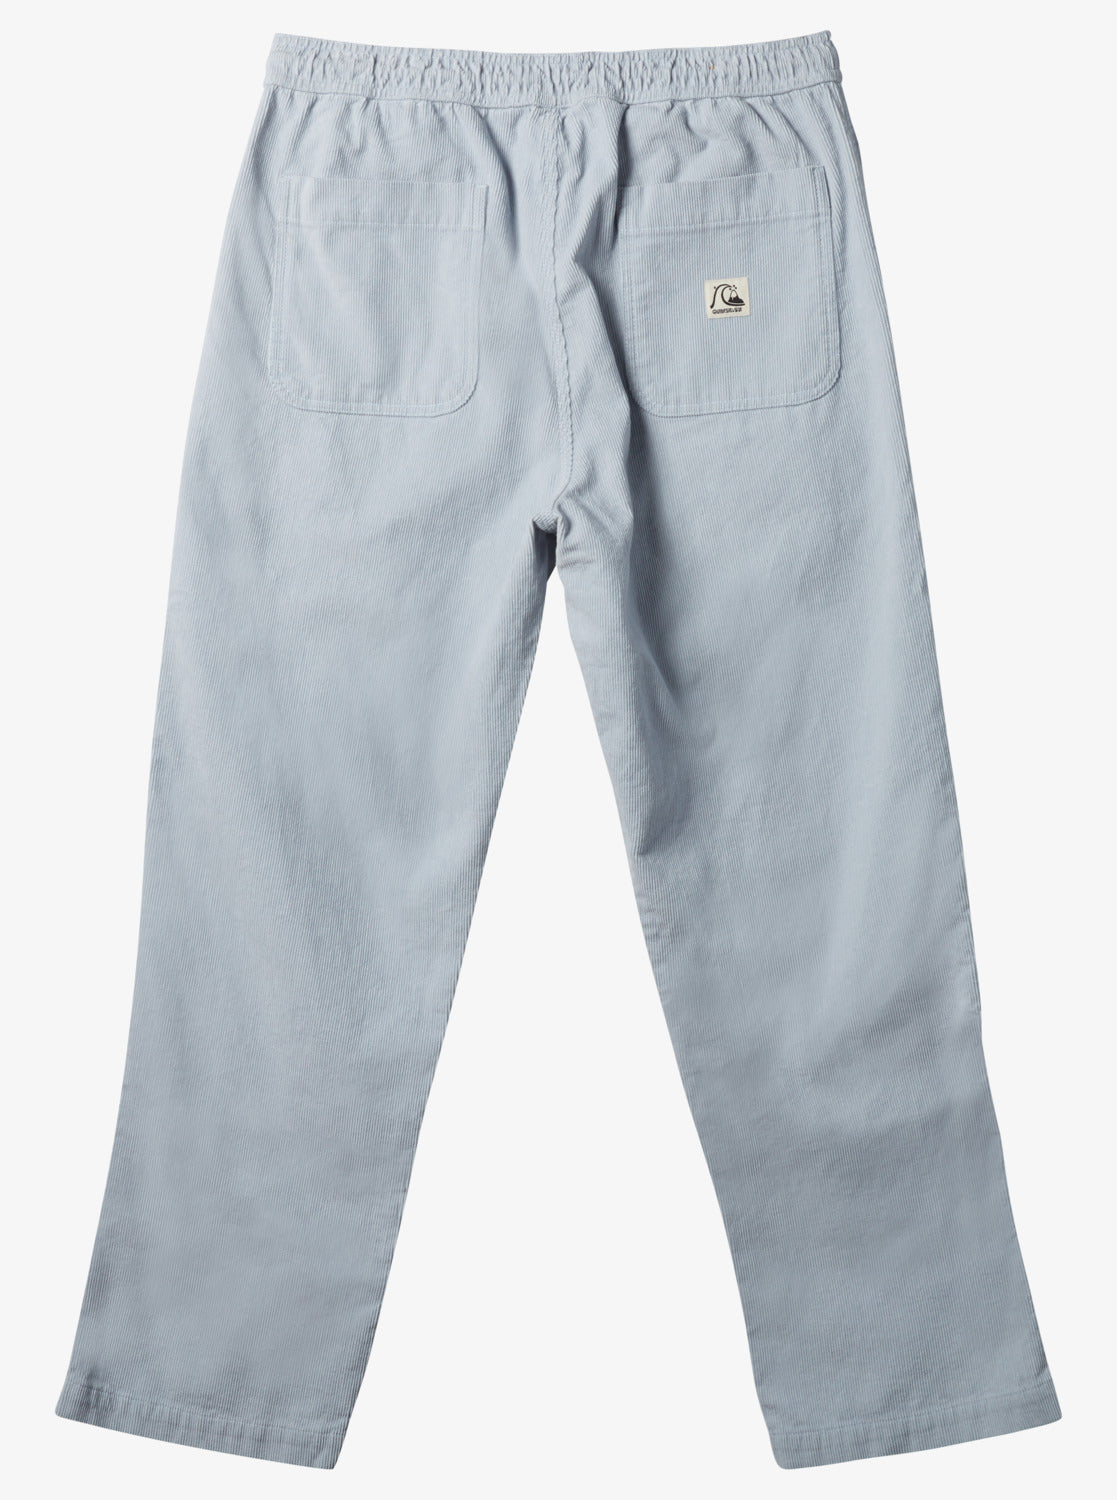 Quiksilver DNA Cord Beach Pants in blue fog from rear